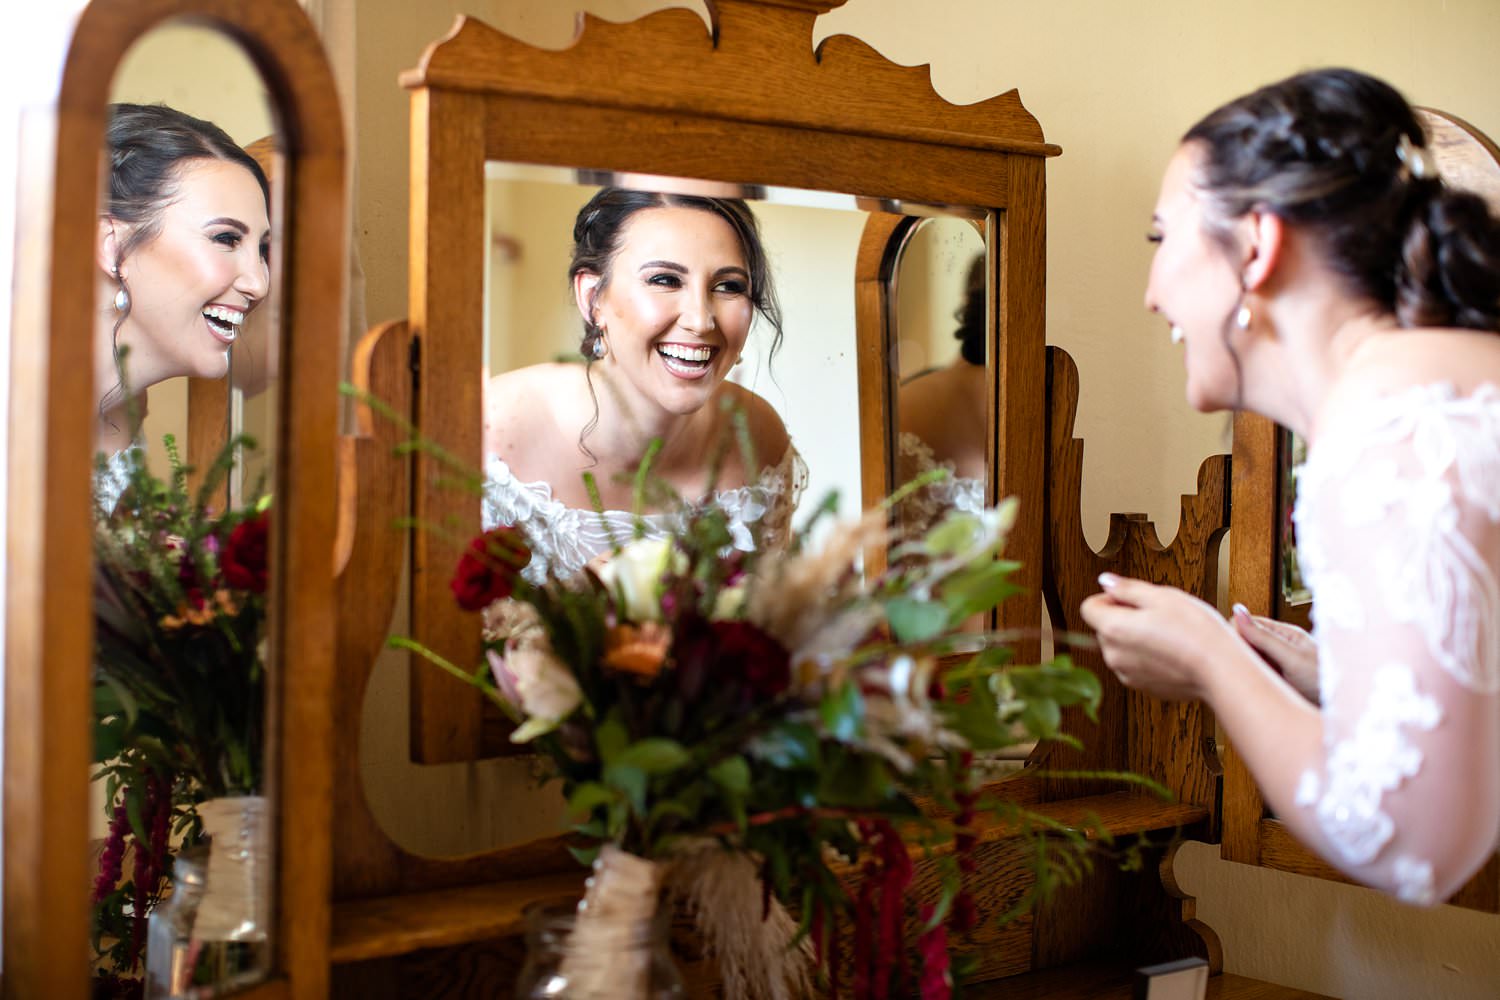 The bride laughs into a mirror as she puts on her earrings whilst preparing for her wedding in Elgin